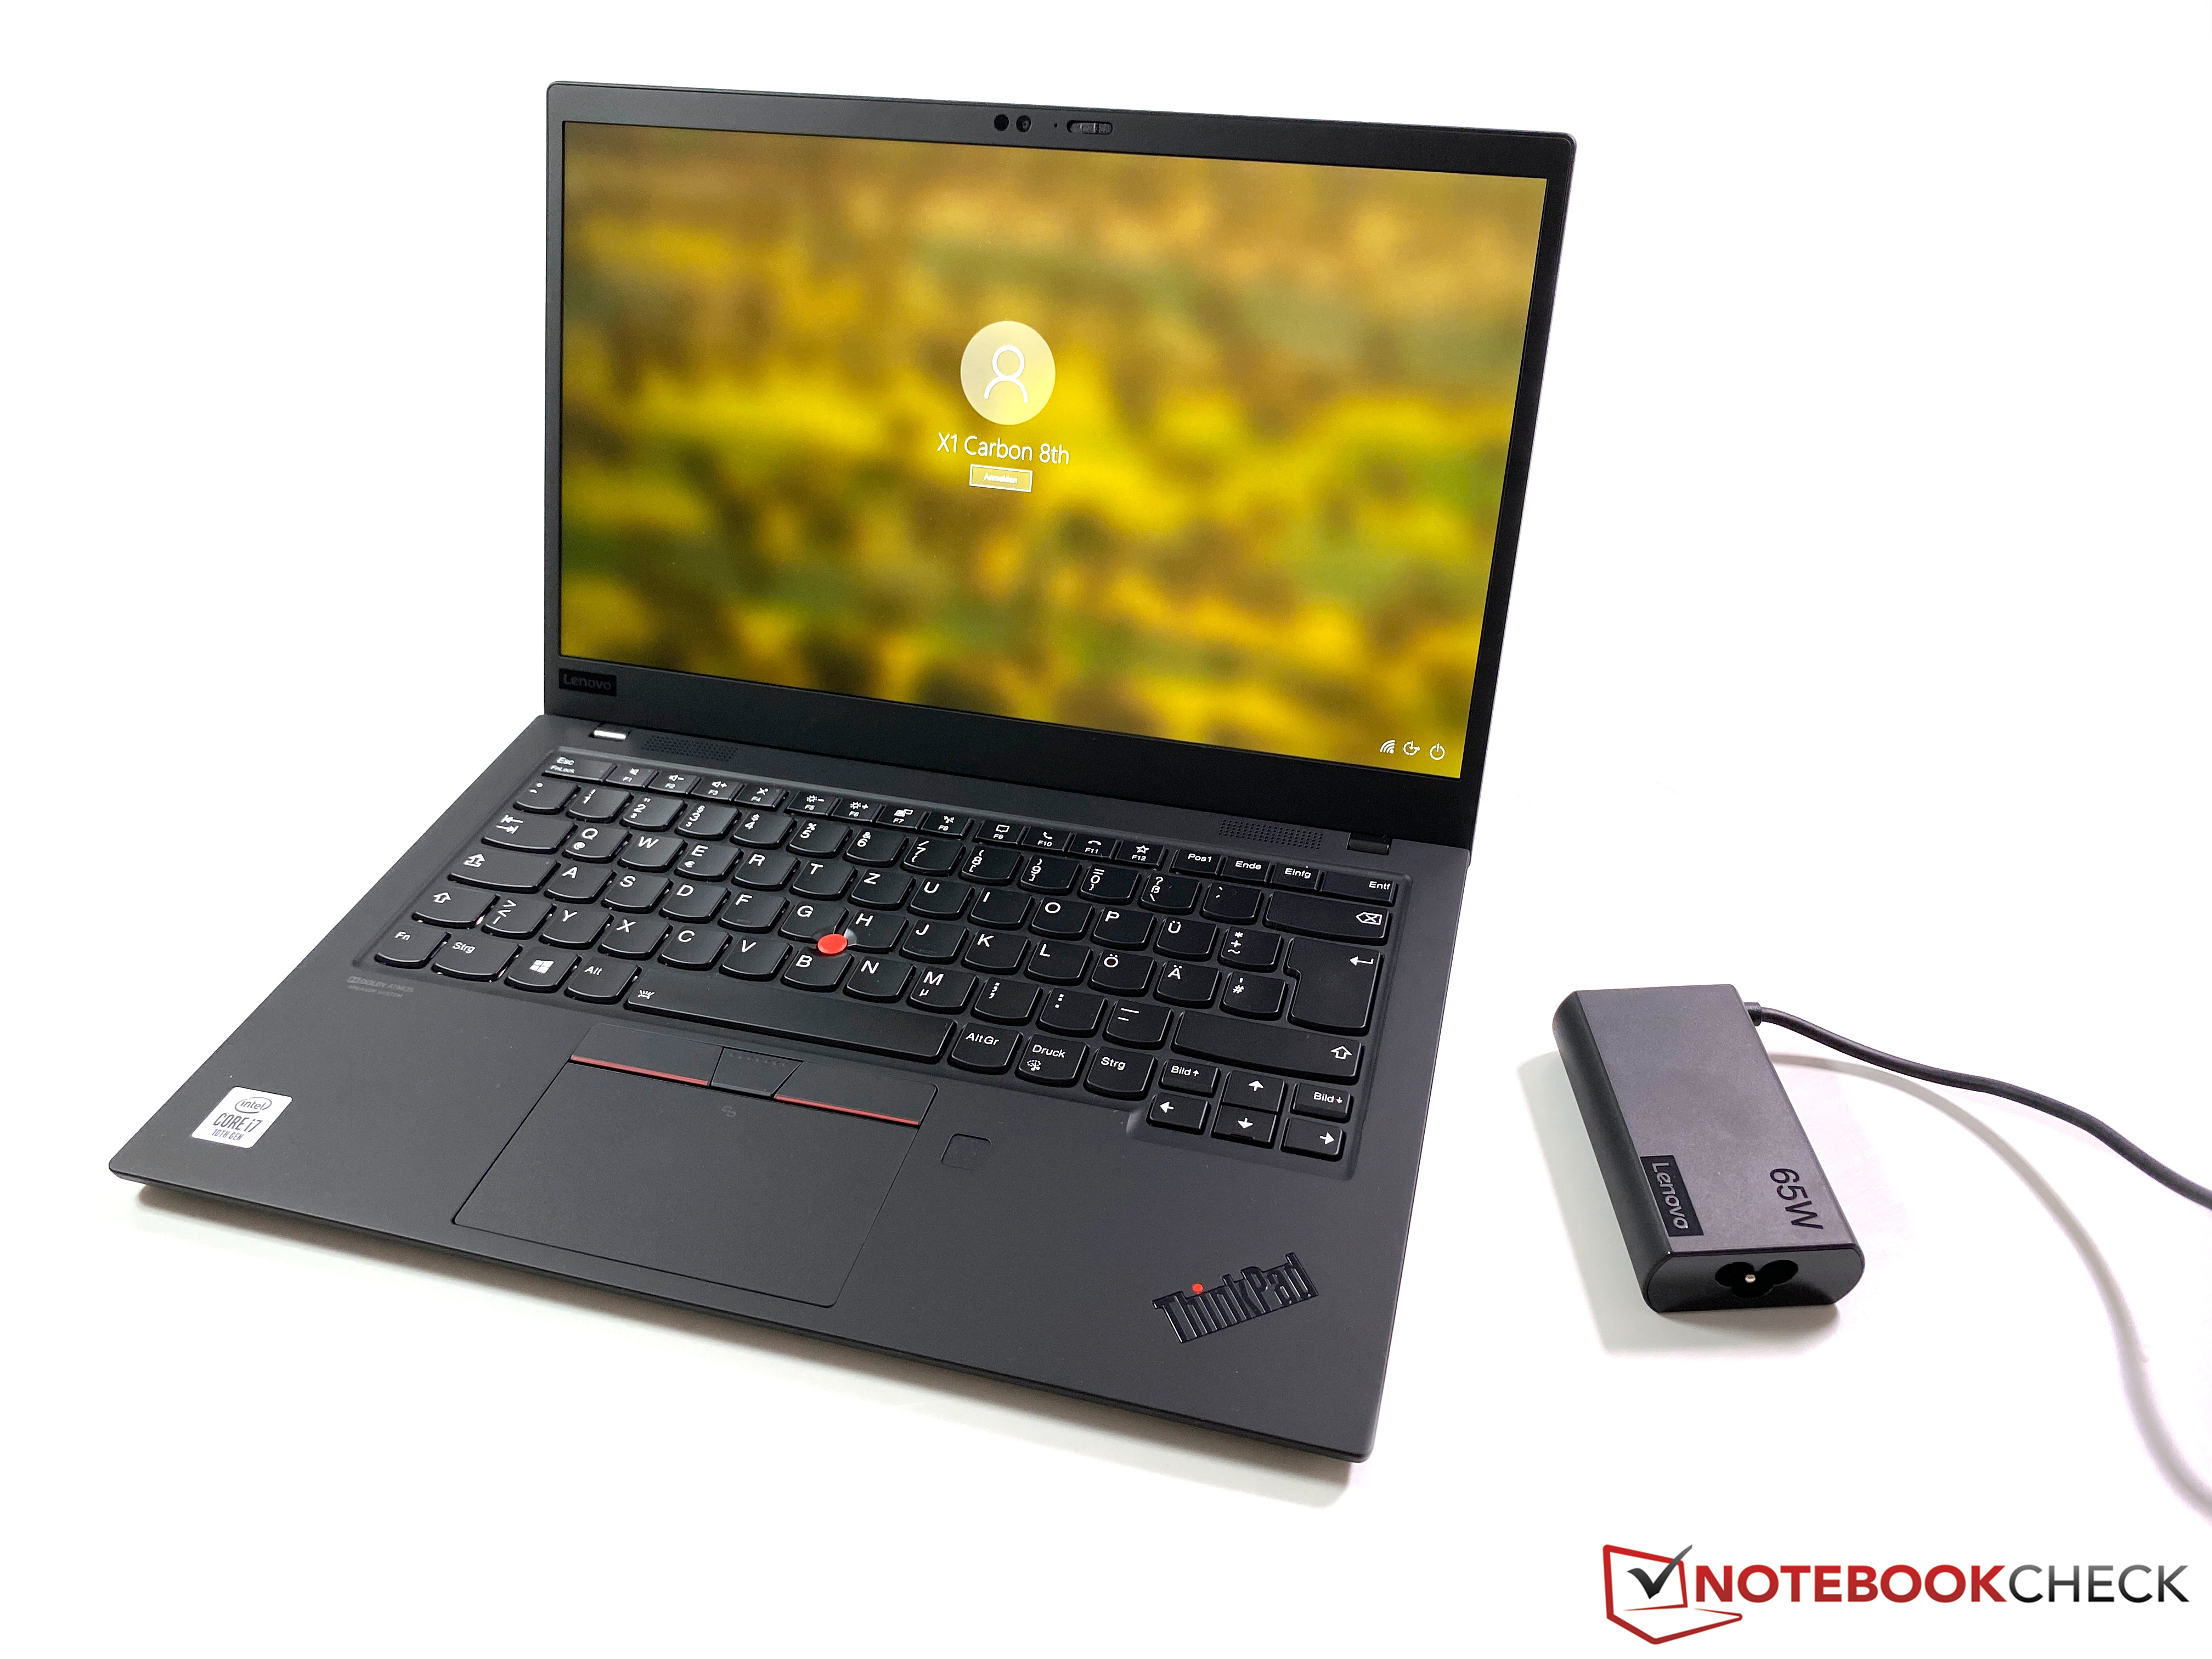 Lenovo ThinkPad X1 Carbon 2020: Just get the 2019 model and save